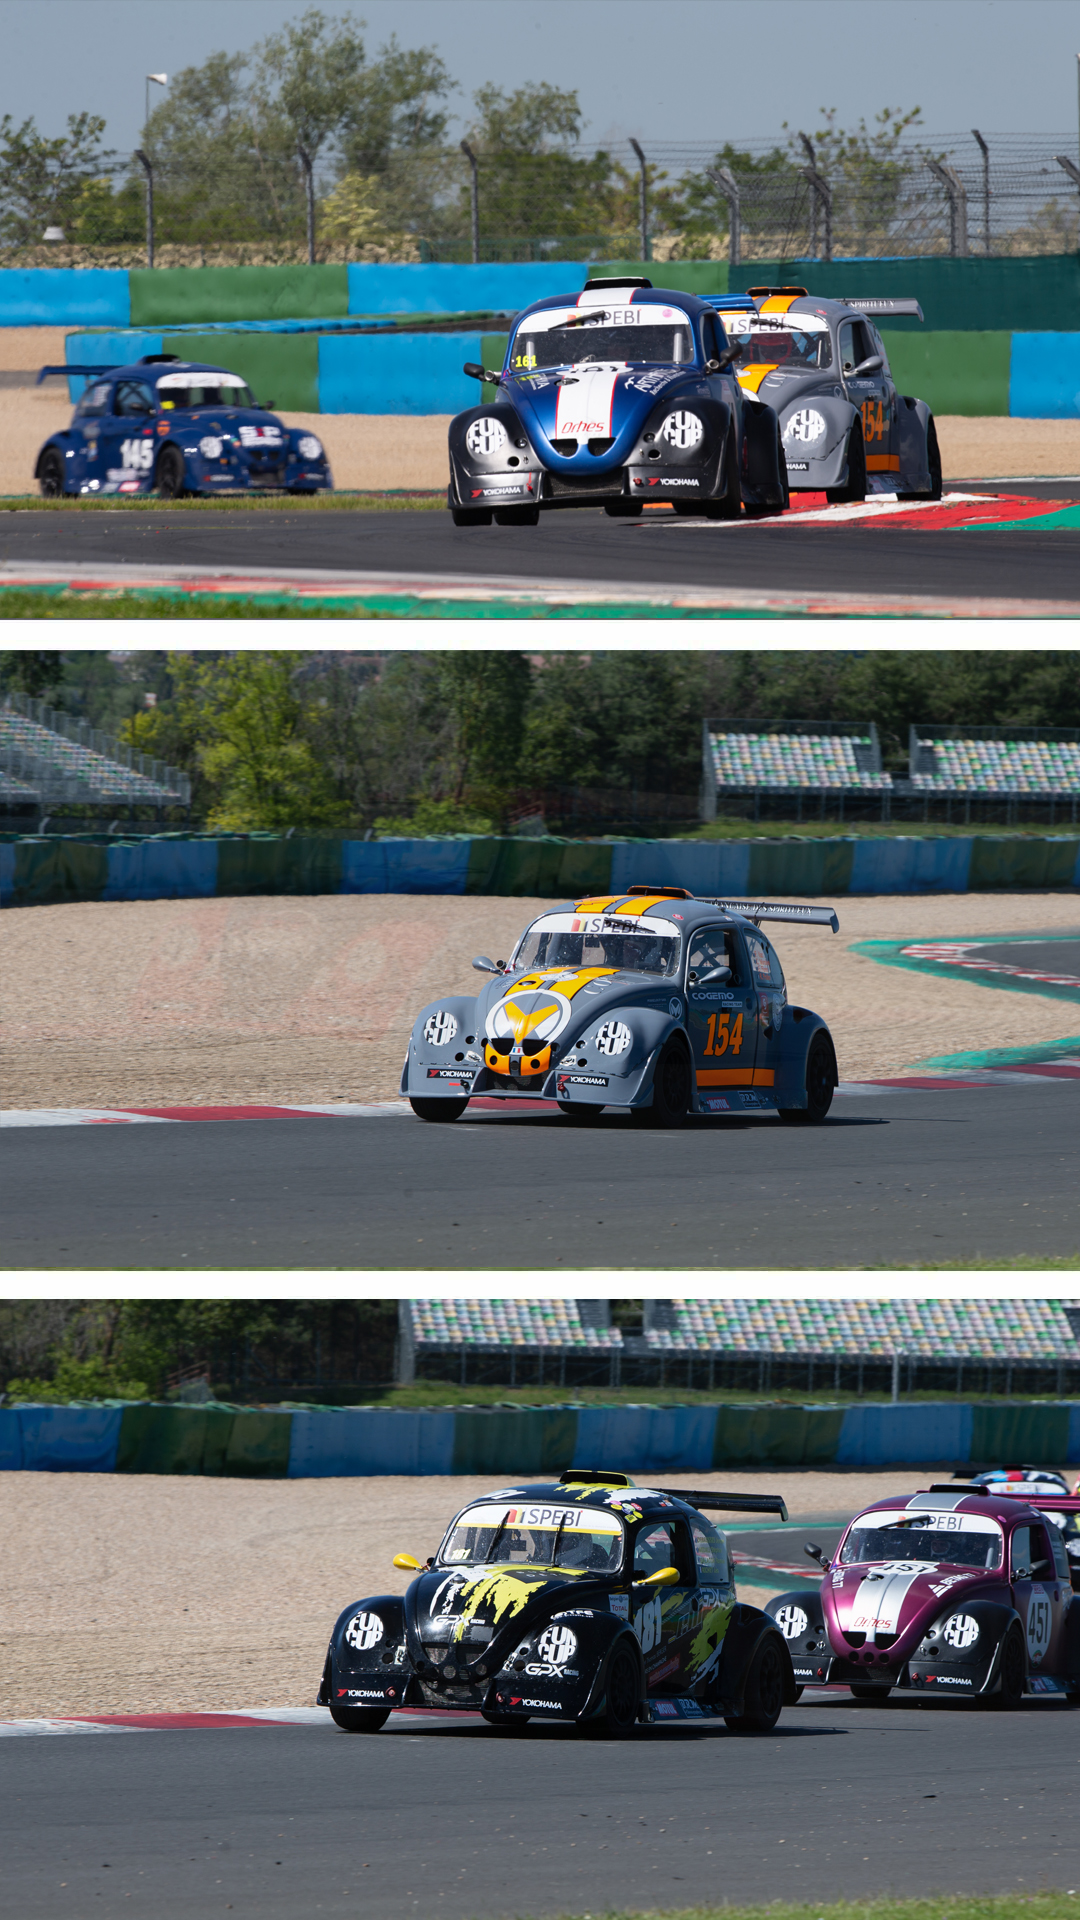 Podium Fun Cup - Magny-Cours 2020